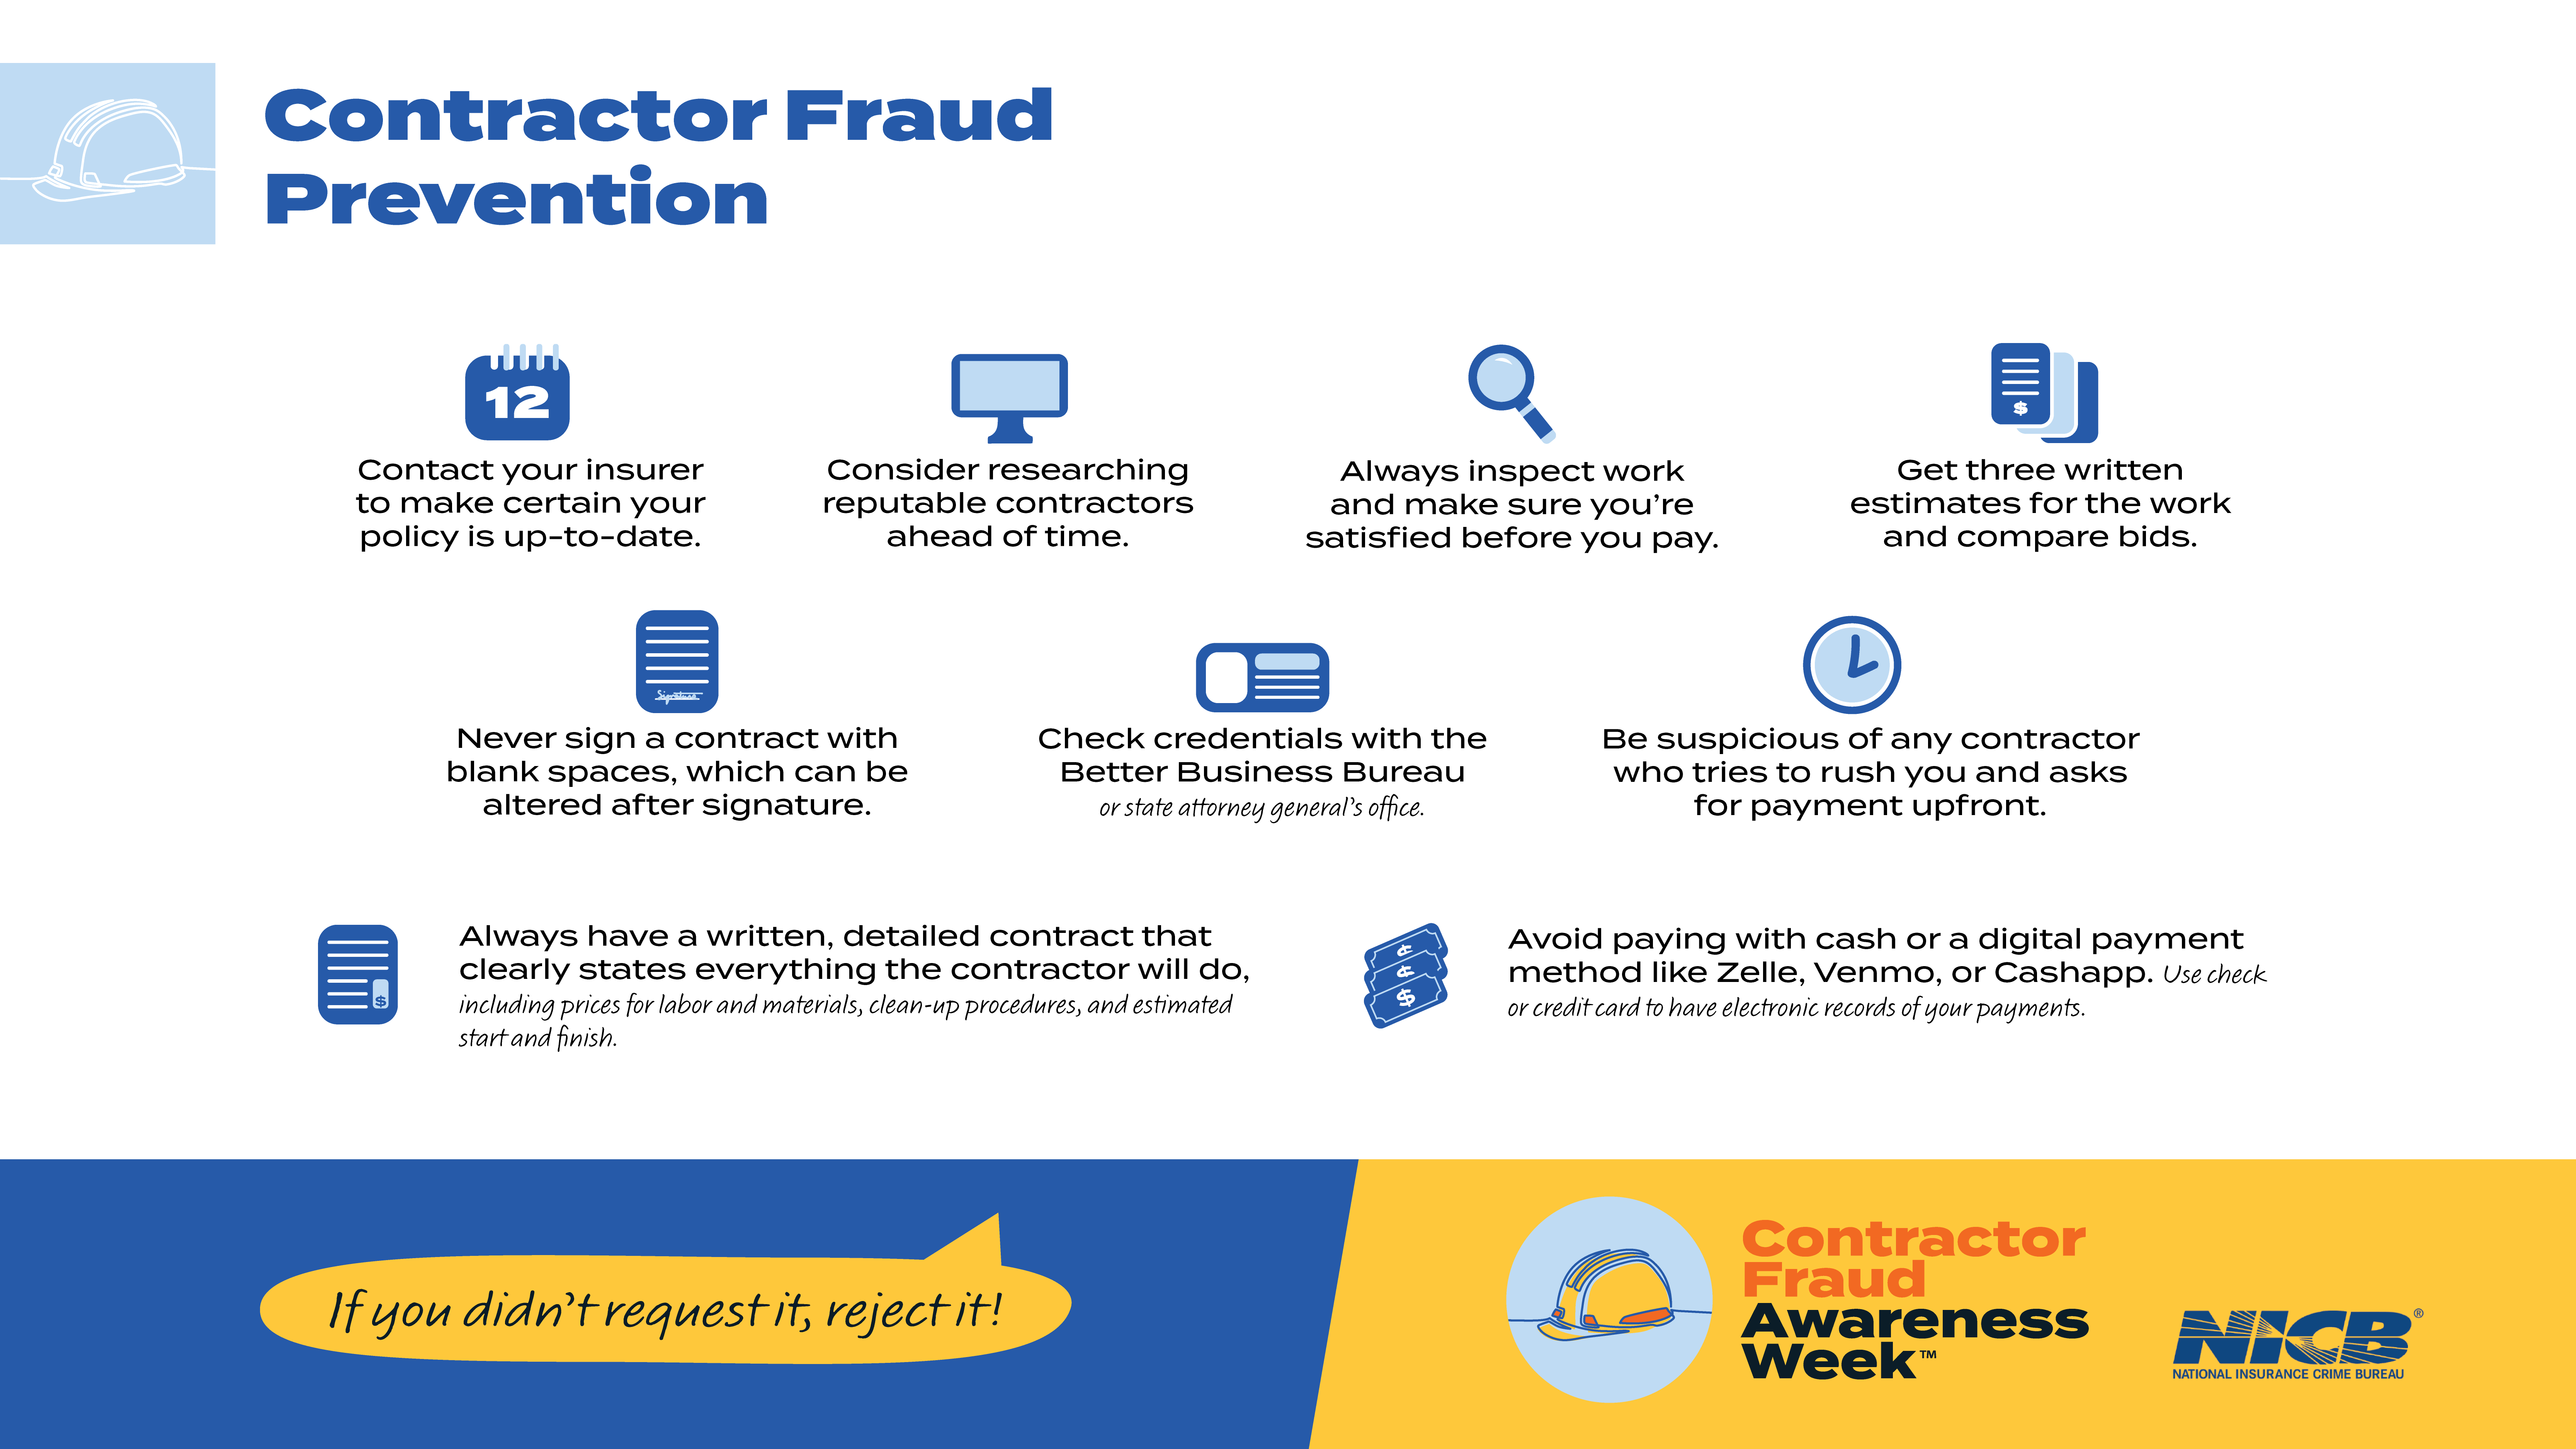 Contractor Fraud Week - Prevention Tips